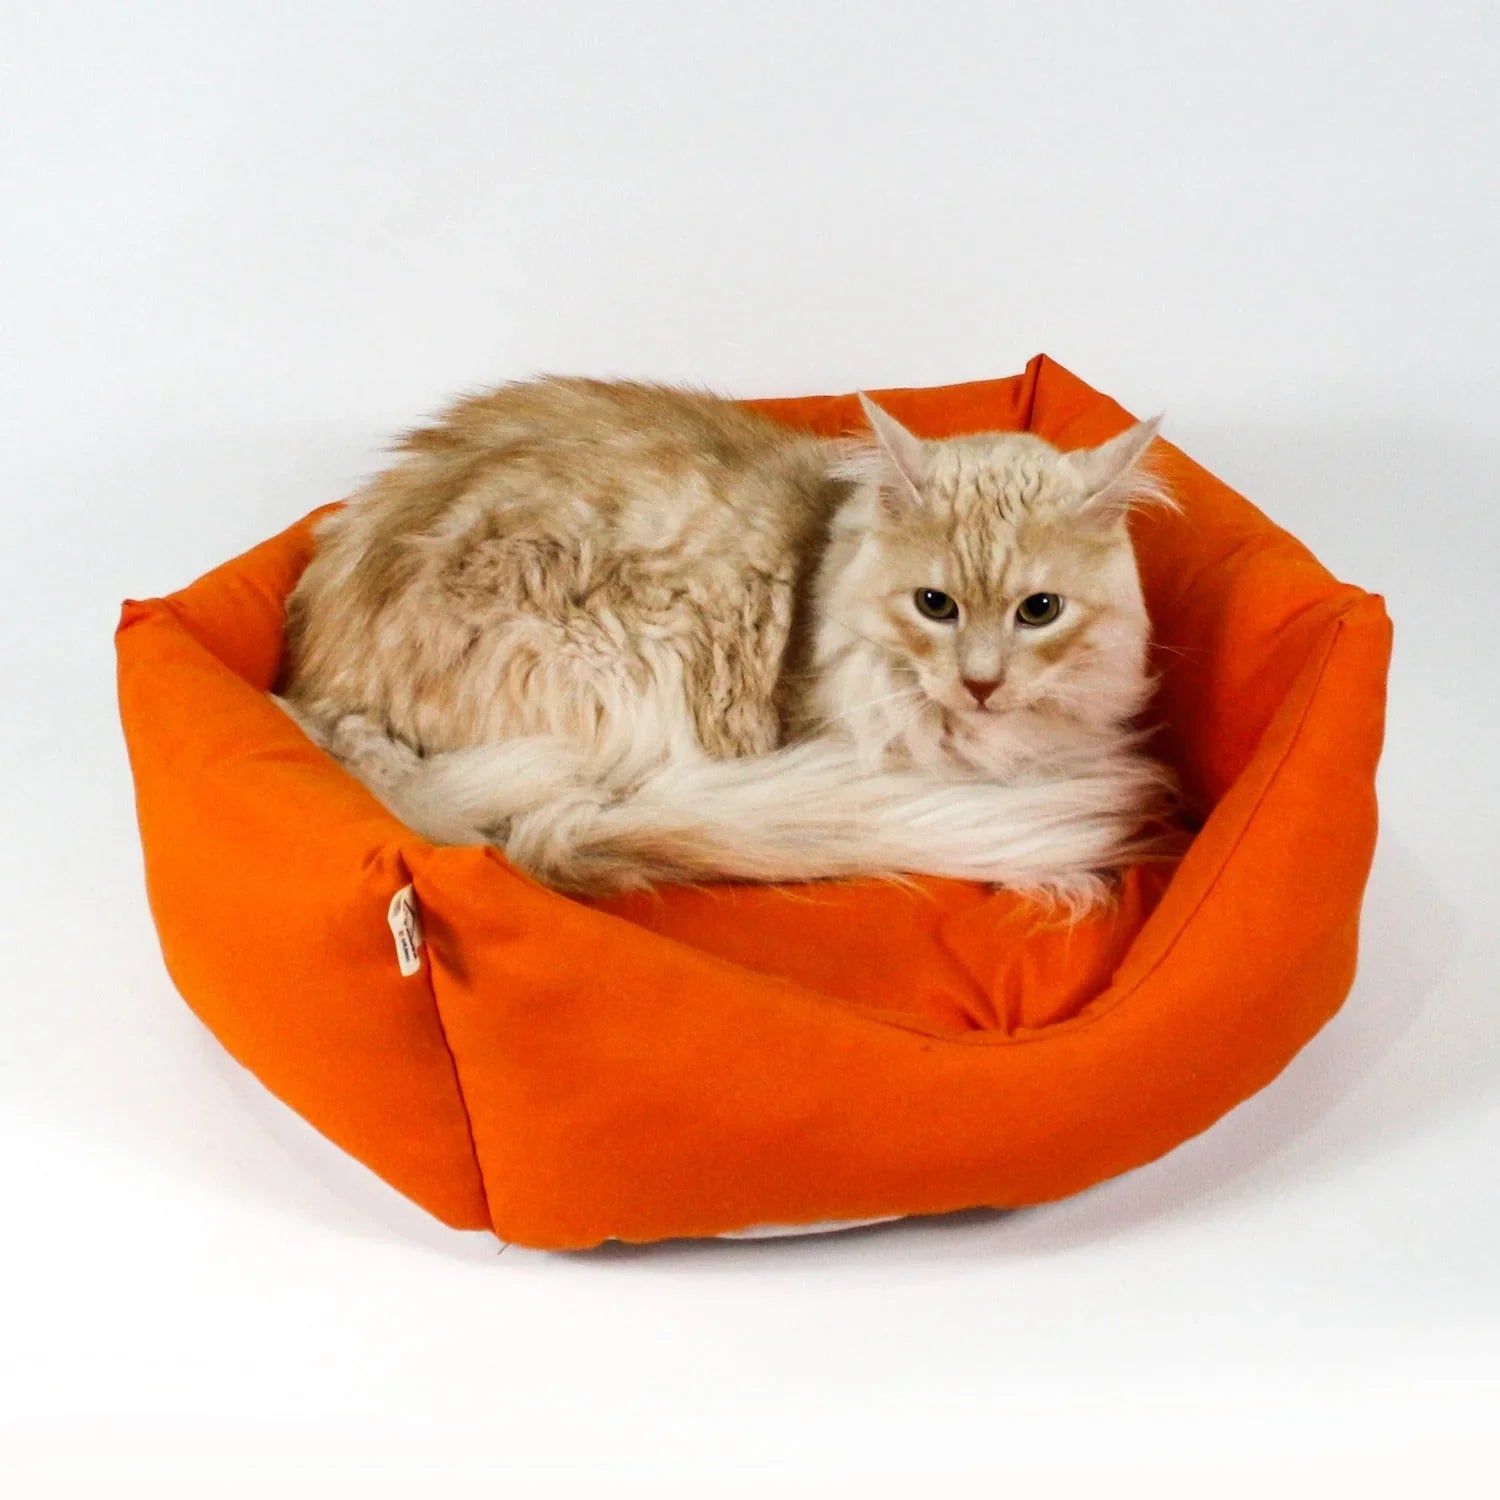 cat dog bed, pet supplies, cat dog outfit clothes, pet clothes, cat dog costume suit dog apparel